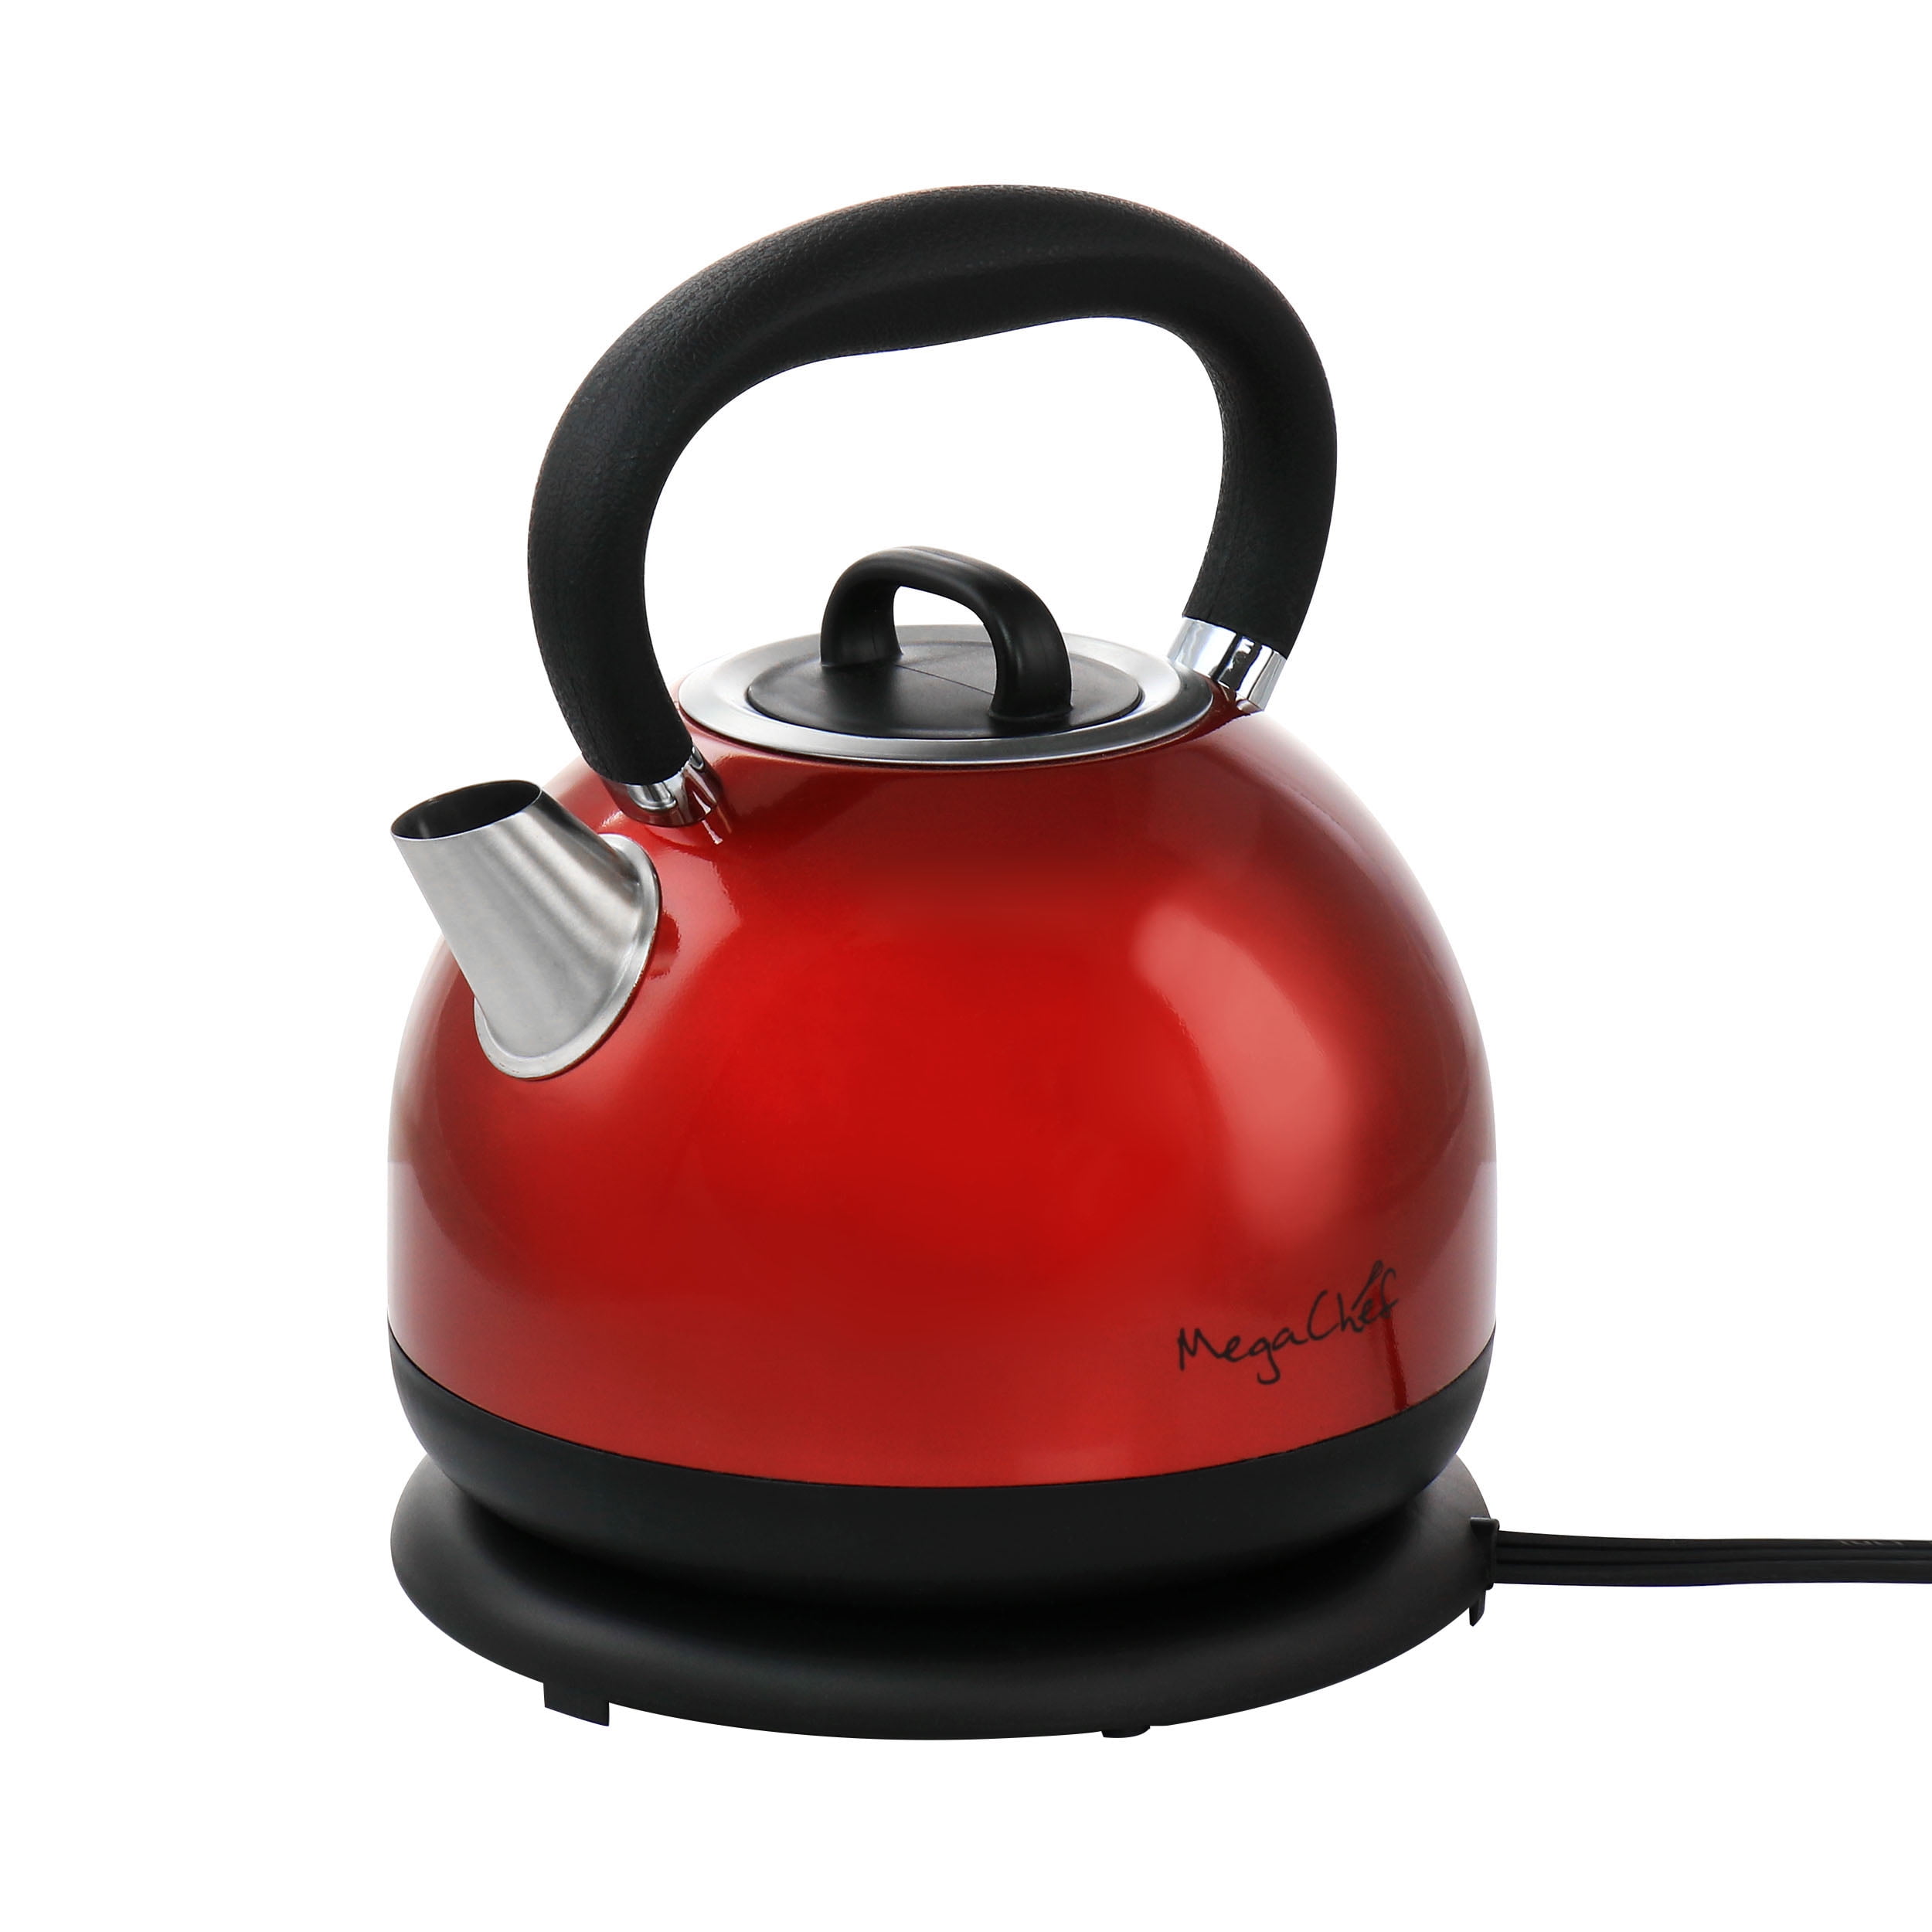 MegaChef 1.8 Liter Glass and Stainless Steel Electric Tea Kettle 